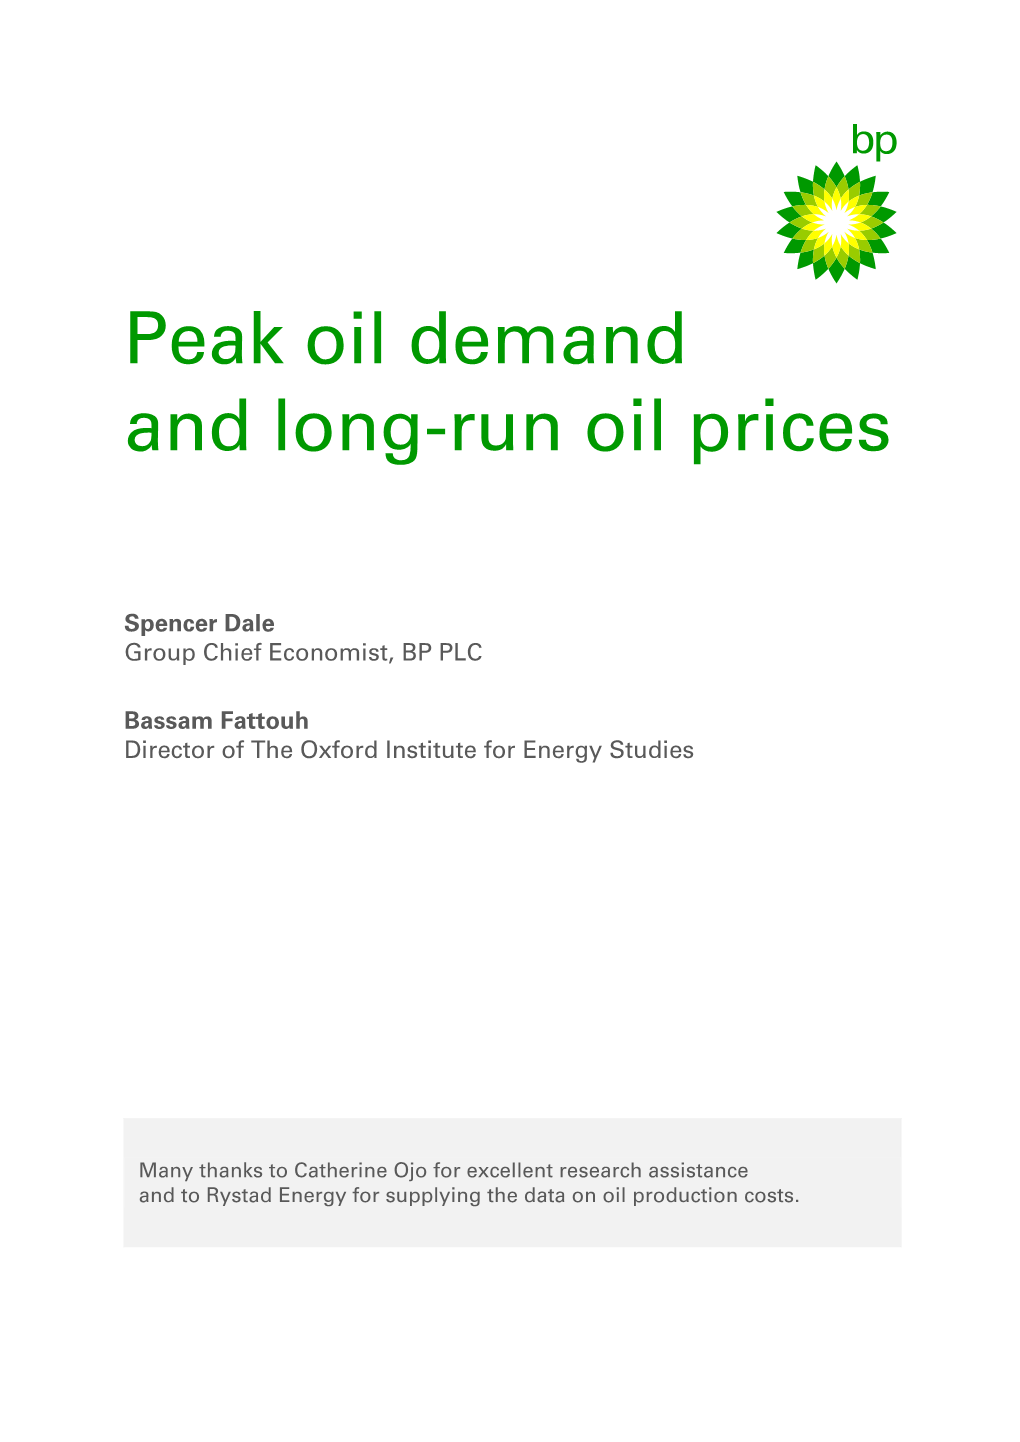 Download 'Peak Oil Demand and Long-Run Oil Prices'